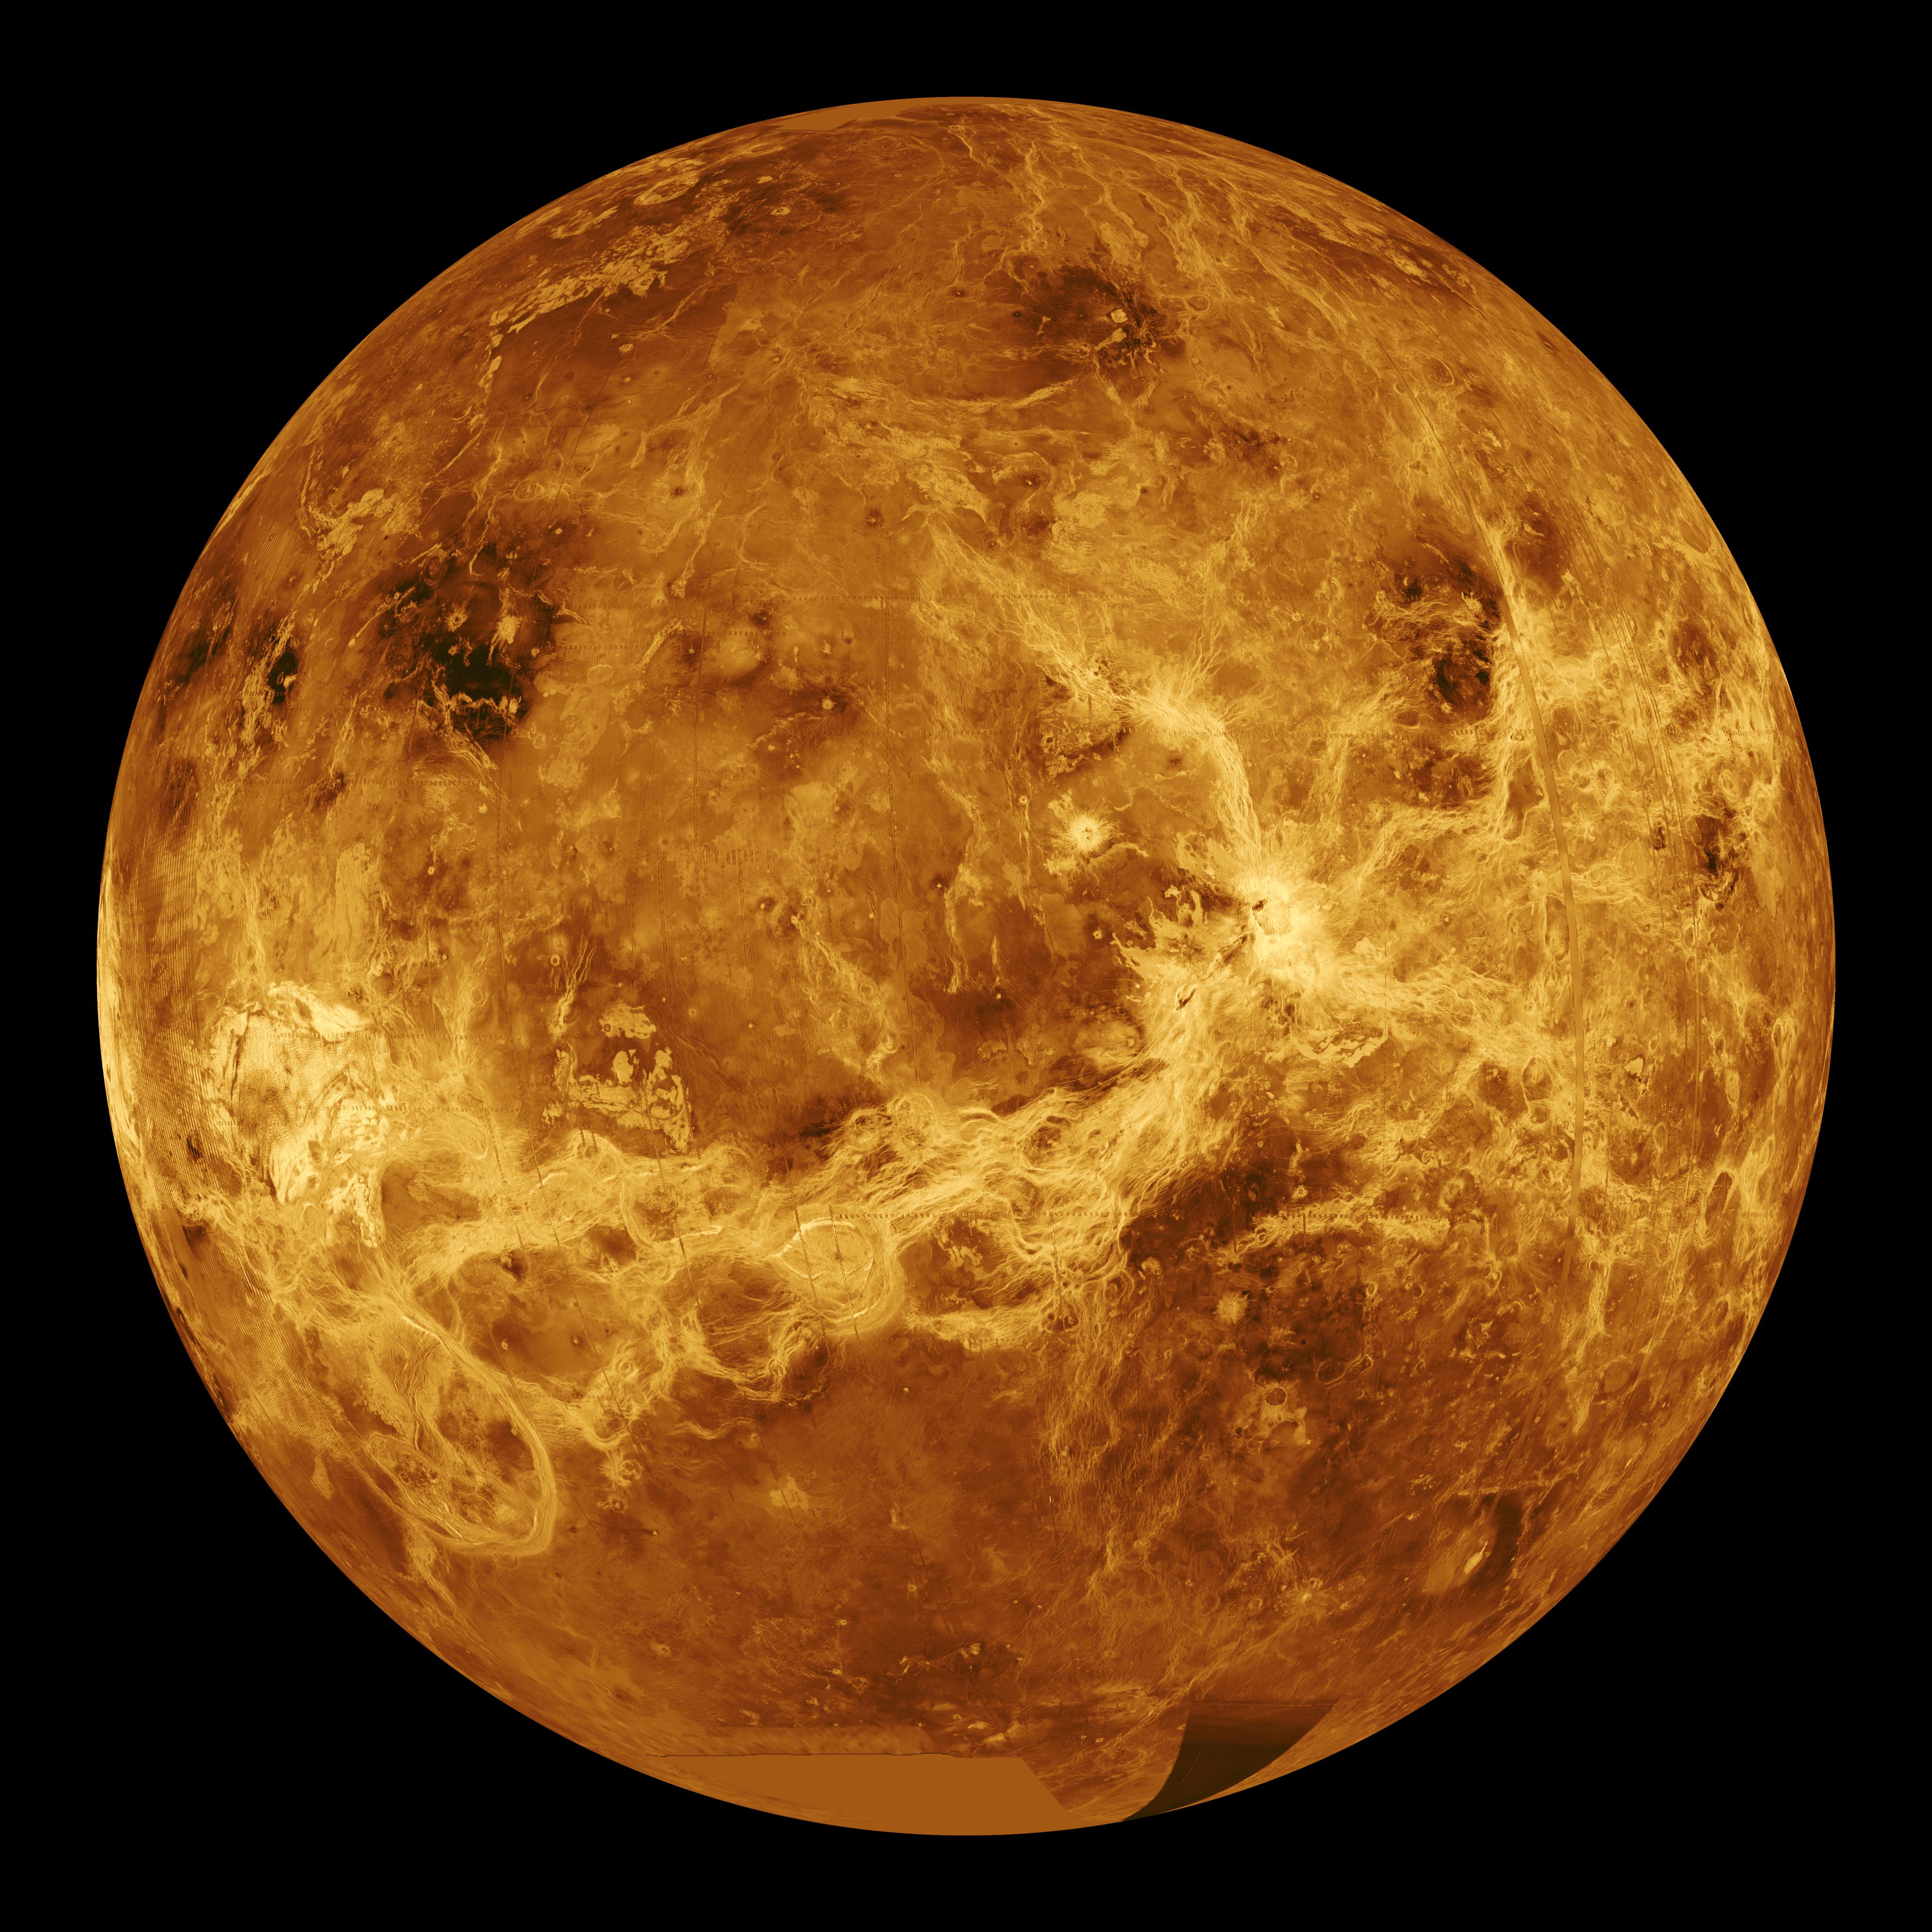 Venus appears orange, yellow, and brown in this simulated view.